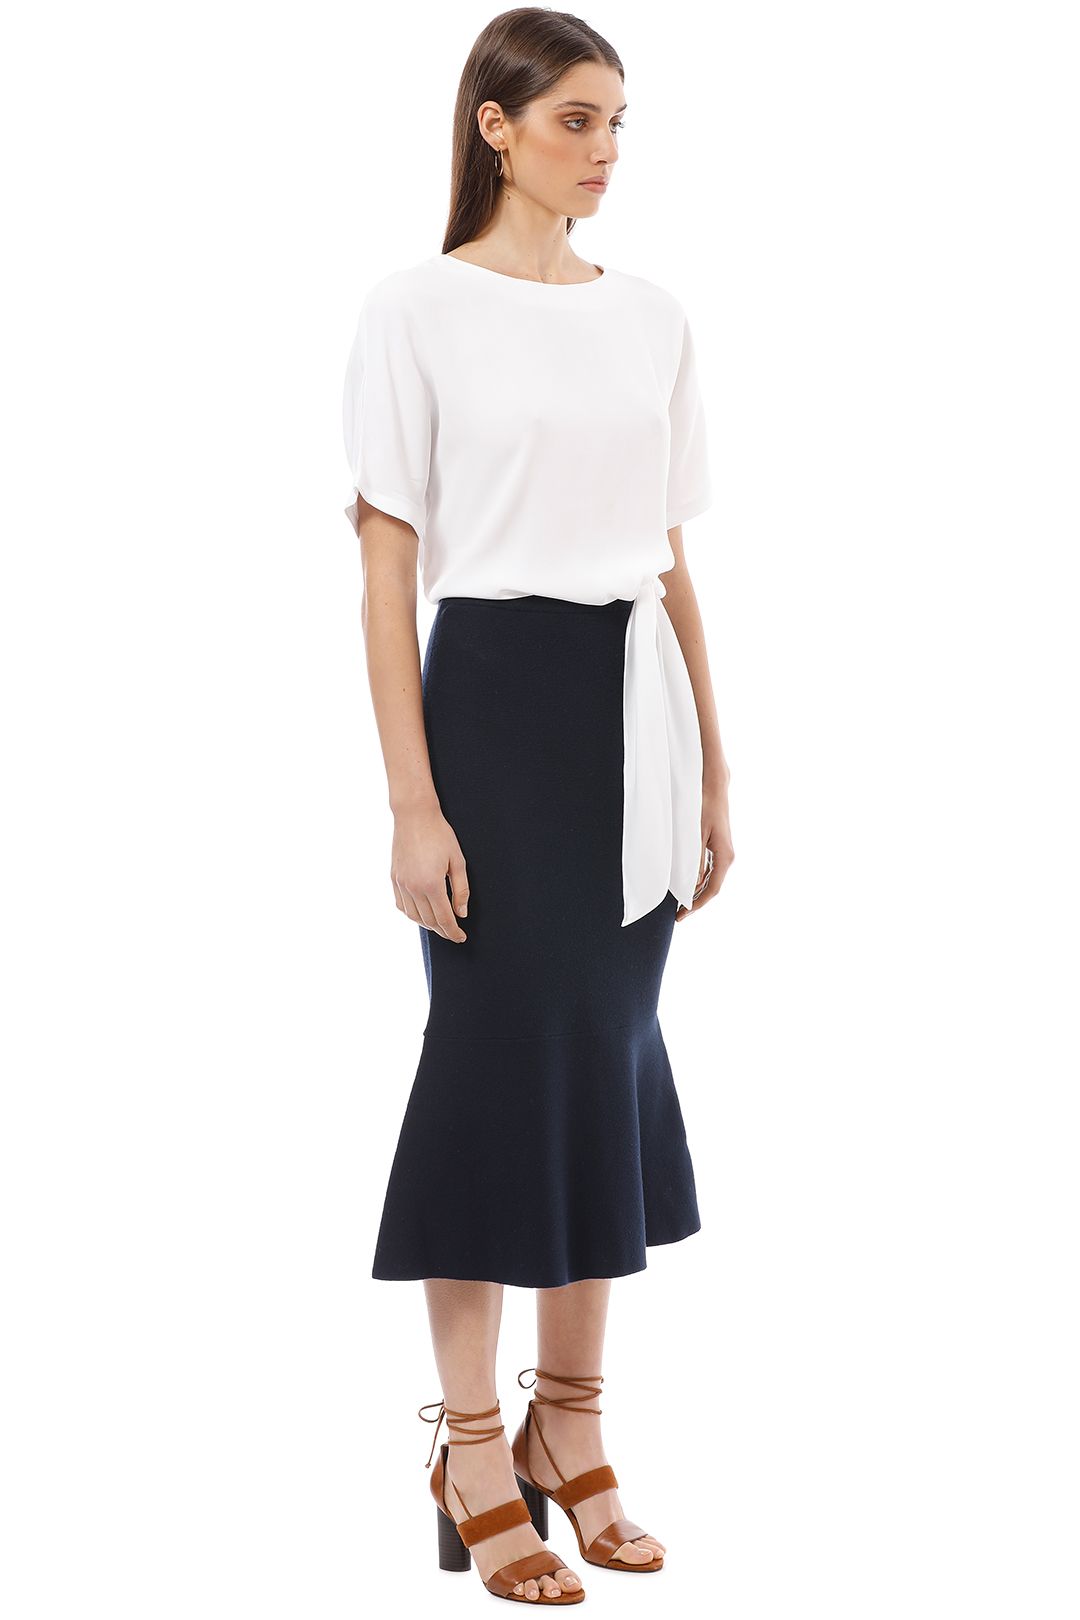 Saba - Carrie Tie Top - White - Side